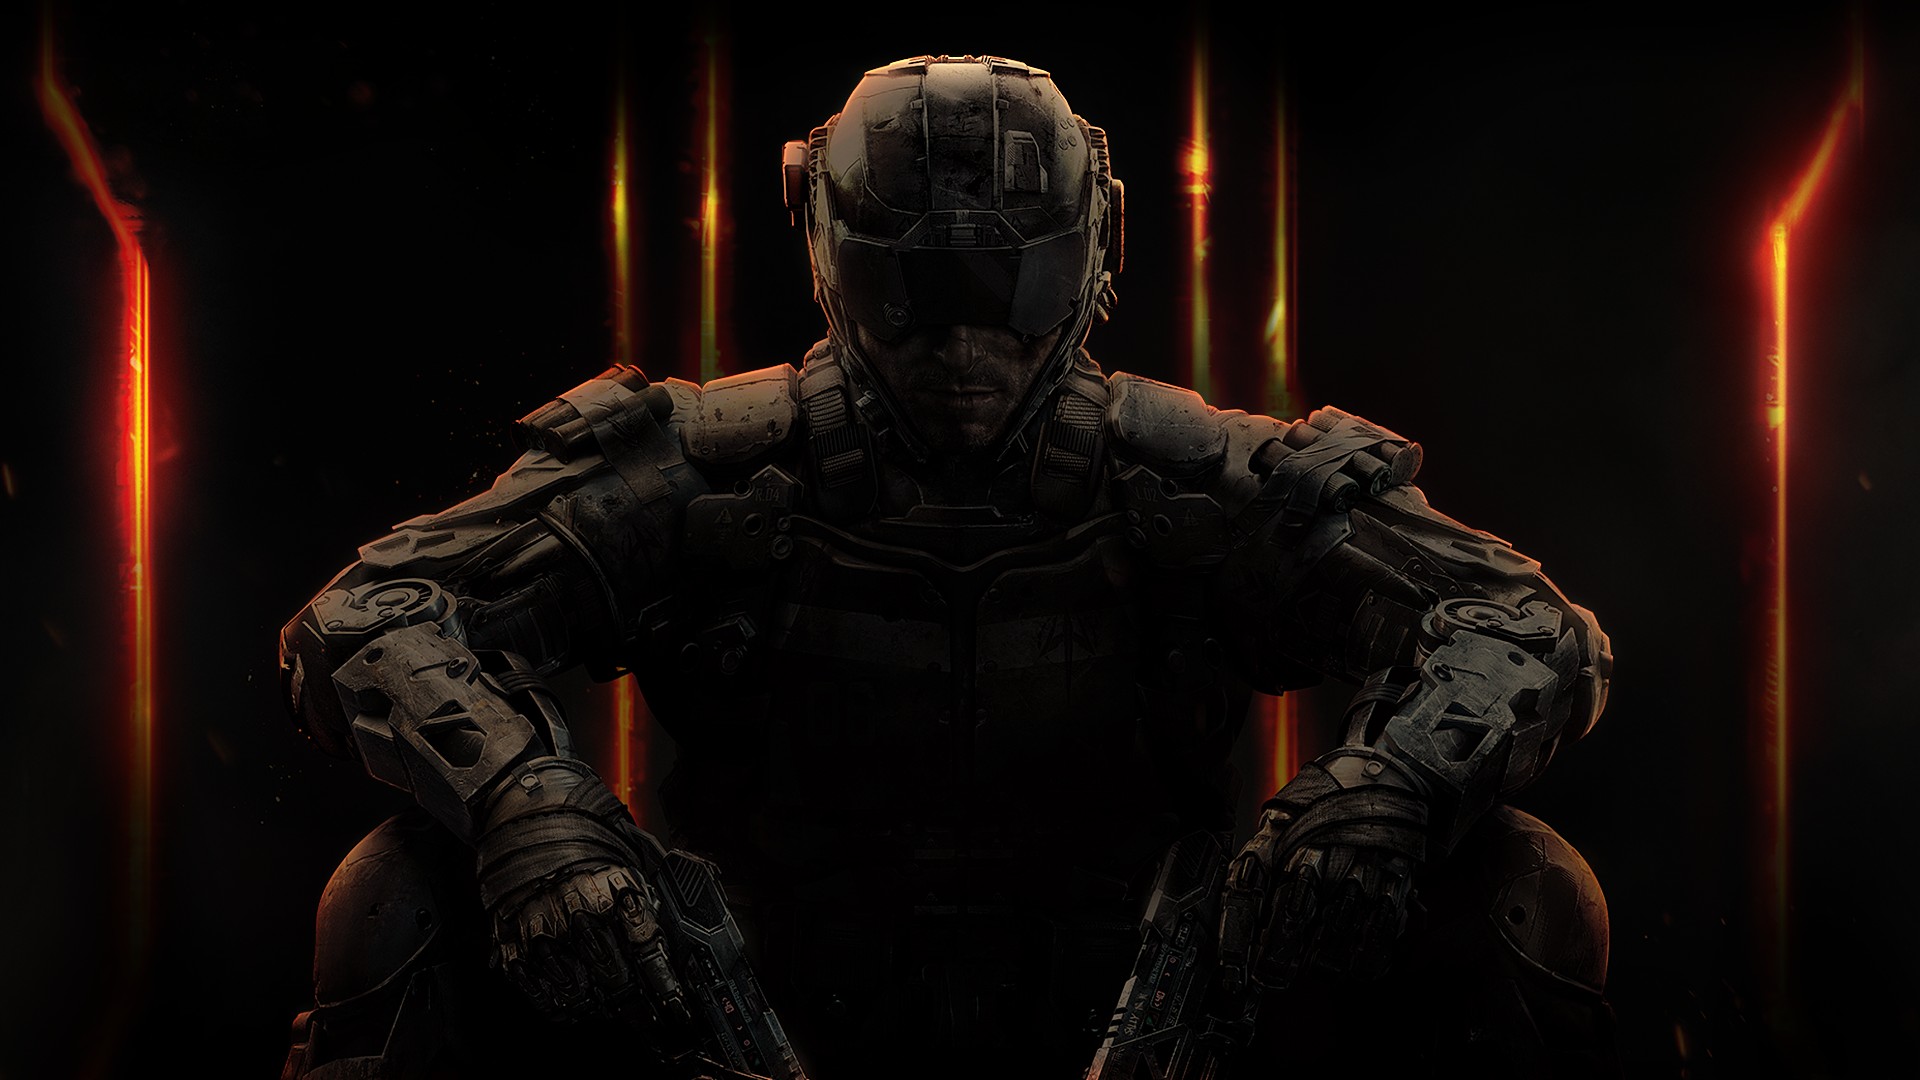 Call Of Duty: Black Ops III - Multiplayer Starter Pack Download Free